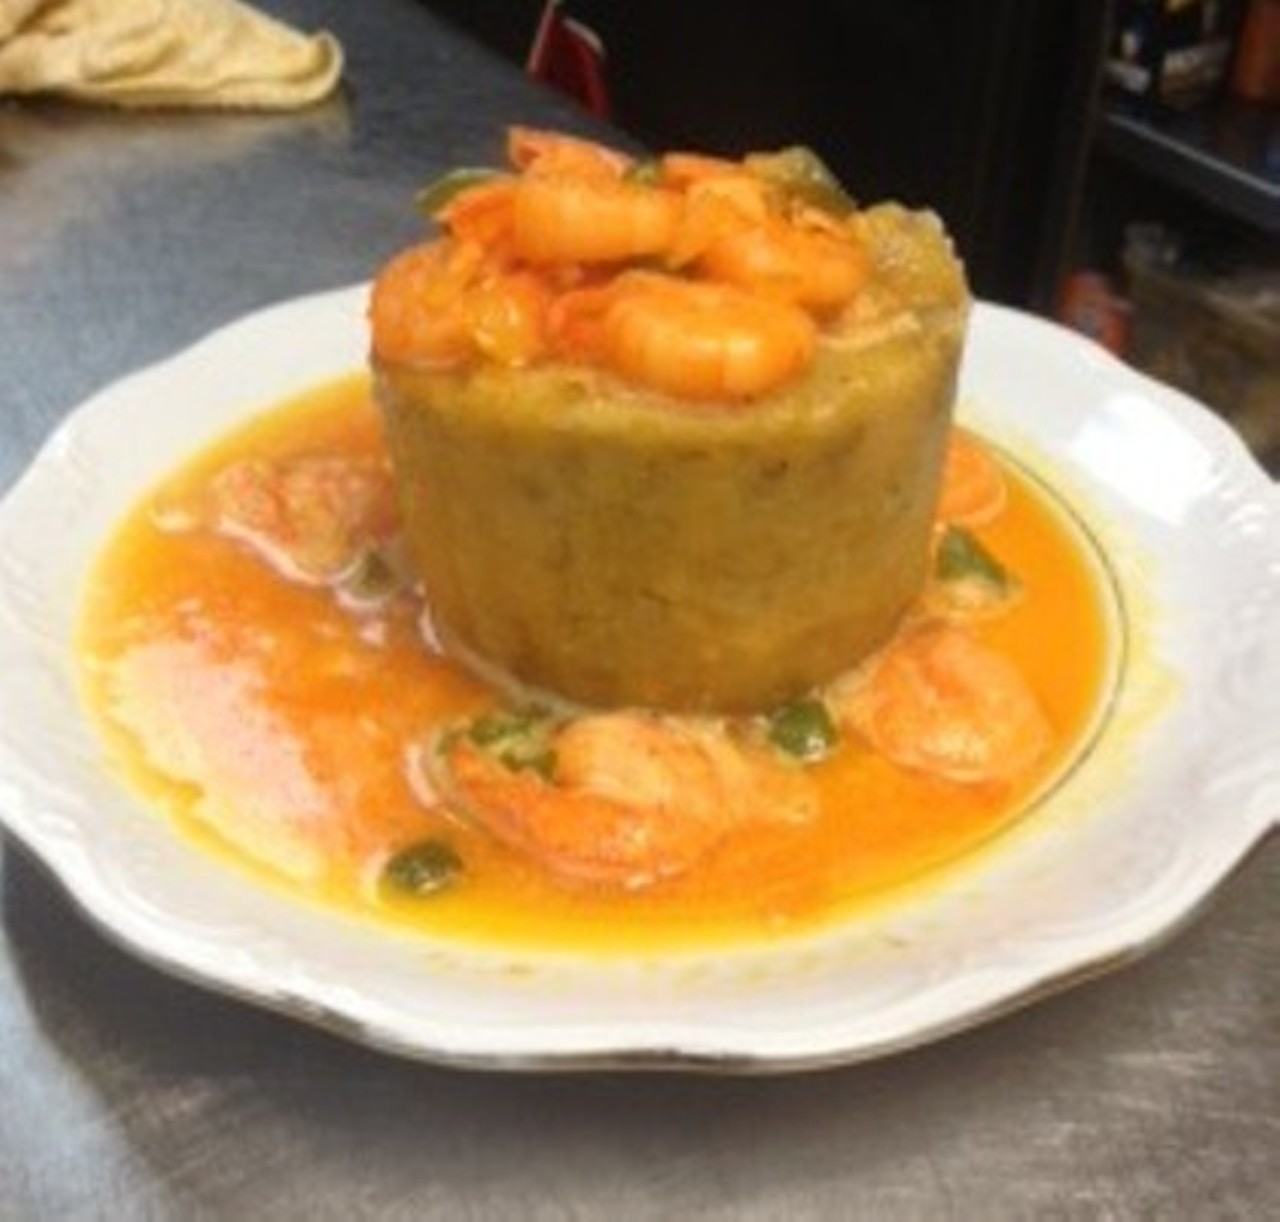 Rincon Crillo in Gordon square does this Puerto Rican dish proud. Starting with mashed plantains in a wooden mortar, garlic, olive oil, and seasoning are then added to the mixture. Served in a ball, Rincon's Mofongo must have shrimp added.